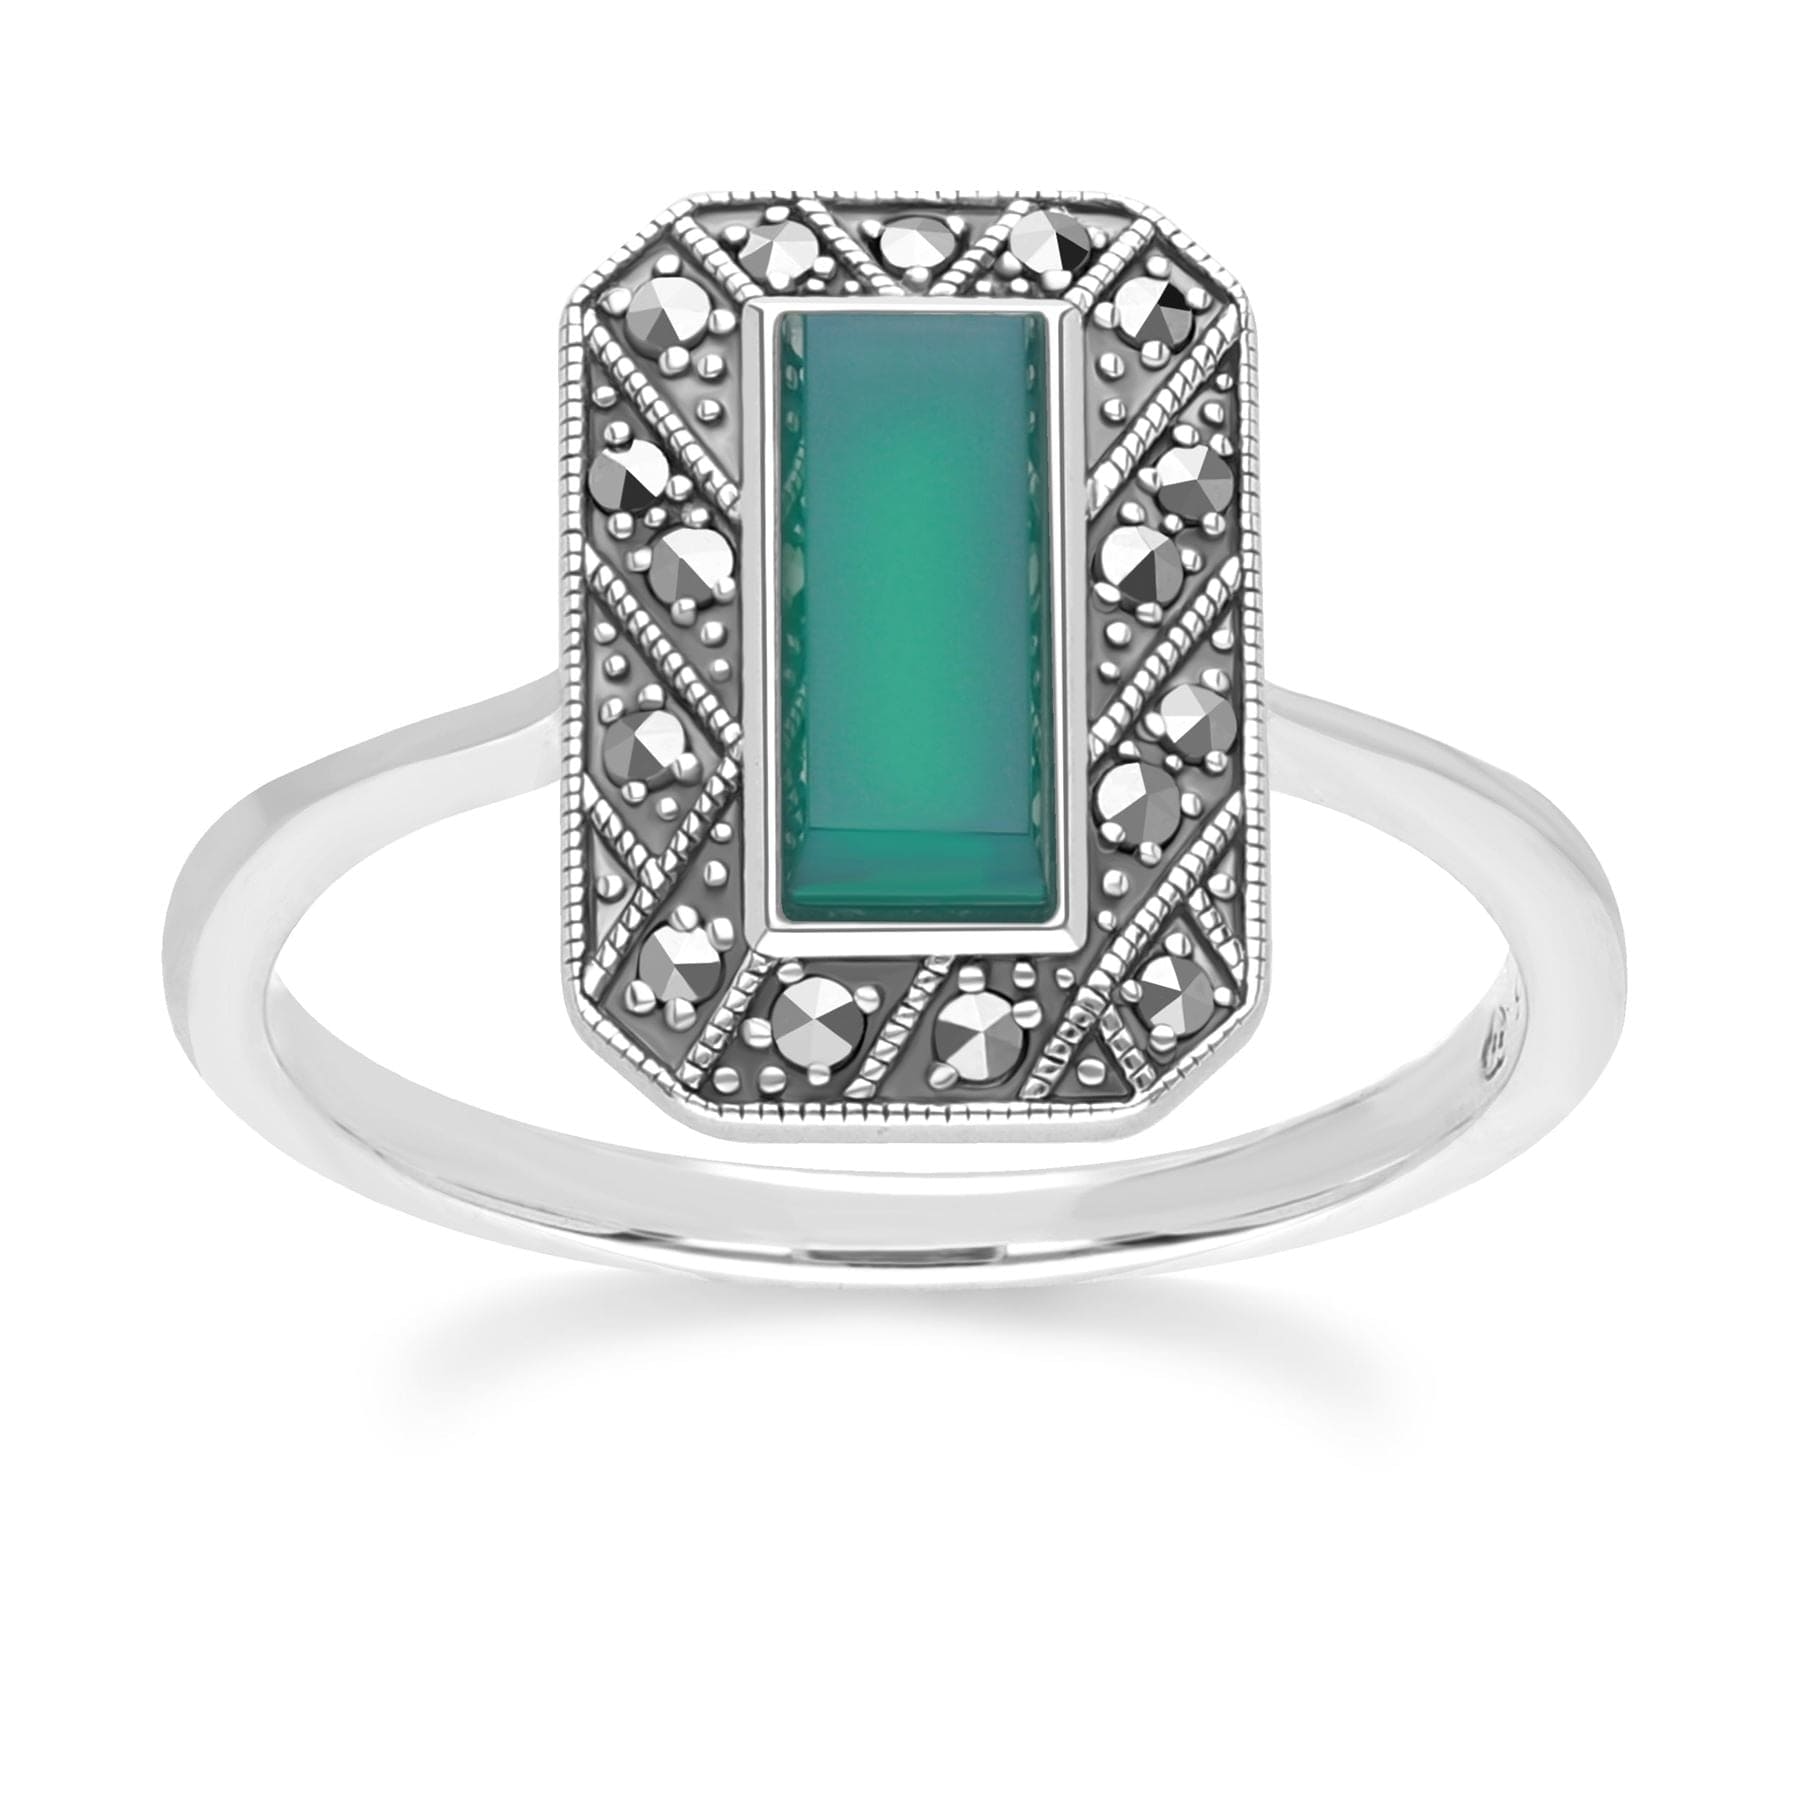 Art Deco Style Rectangle Chalcedony and Marcasite Ring in Sterling Silver 214R641901925 